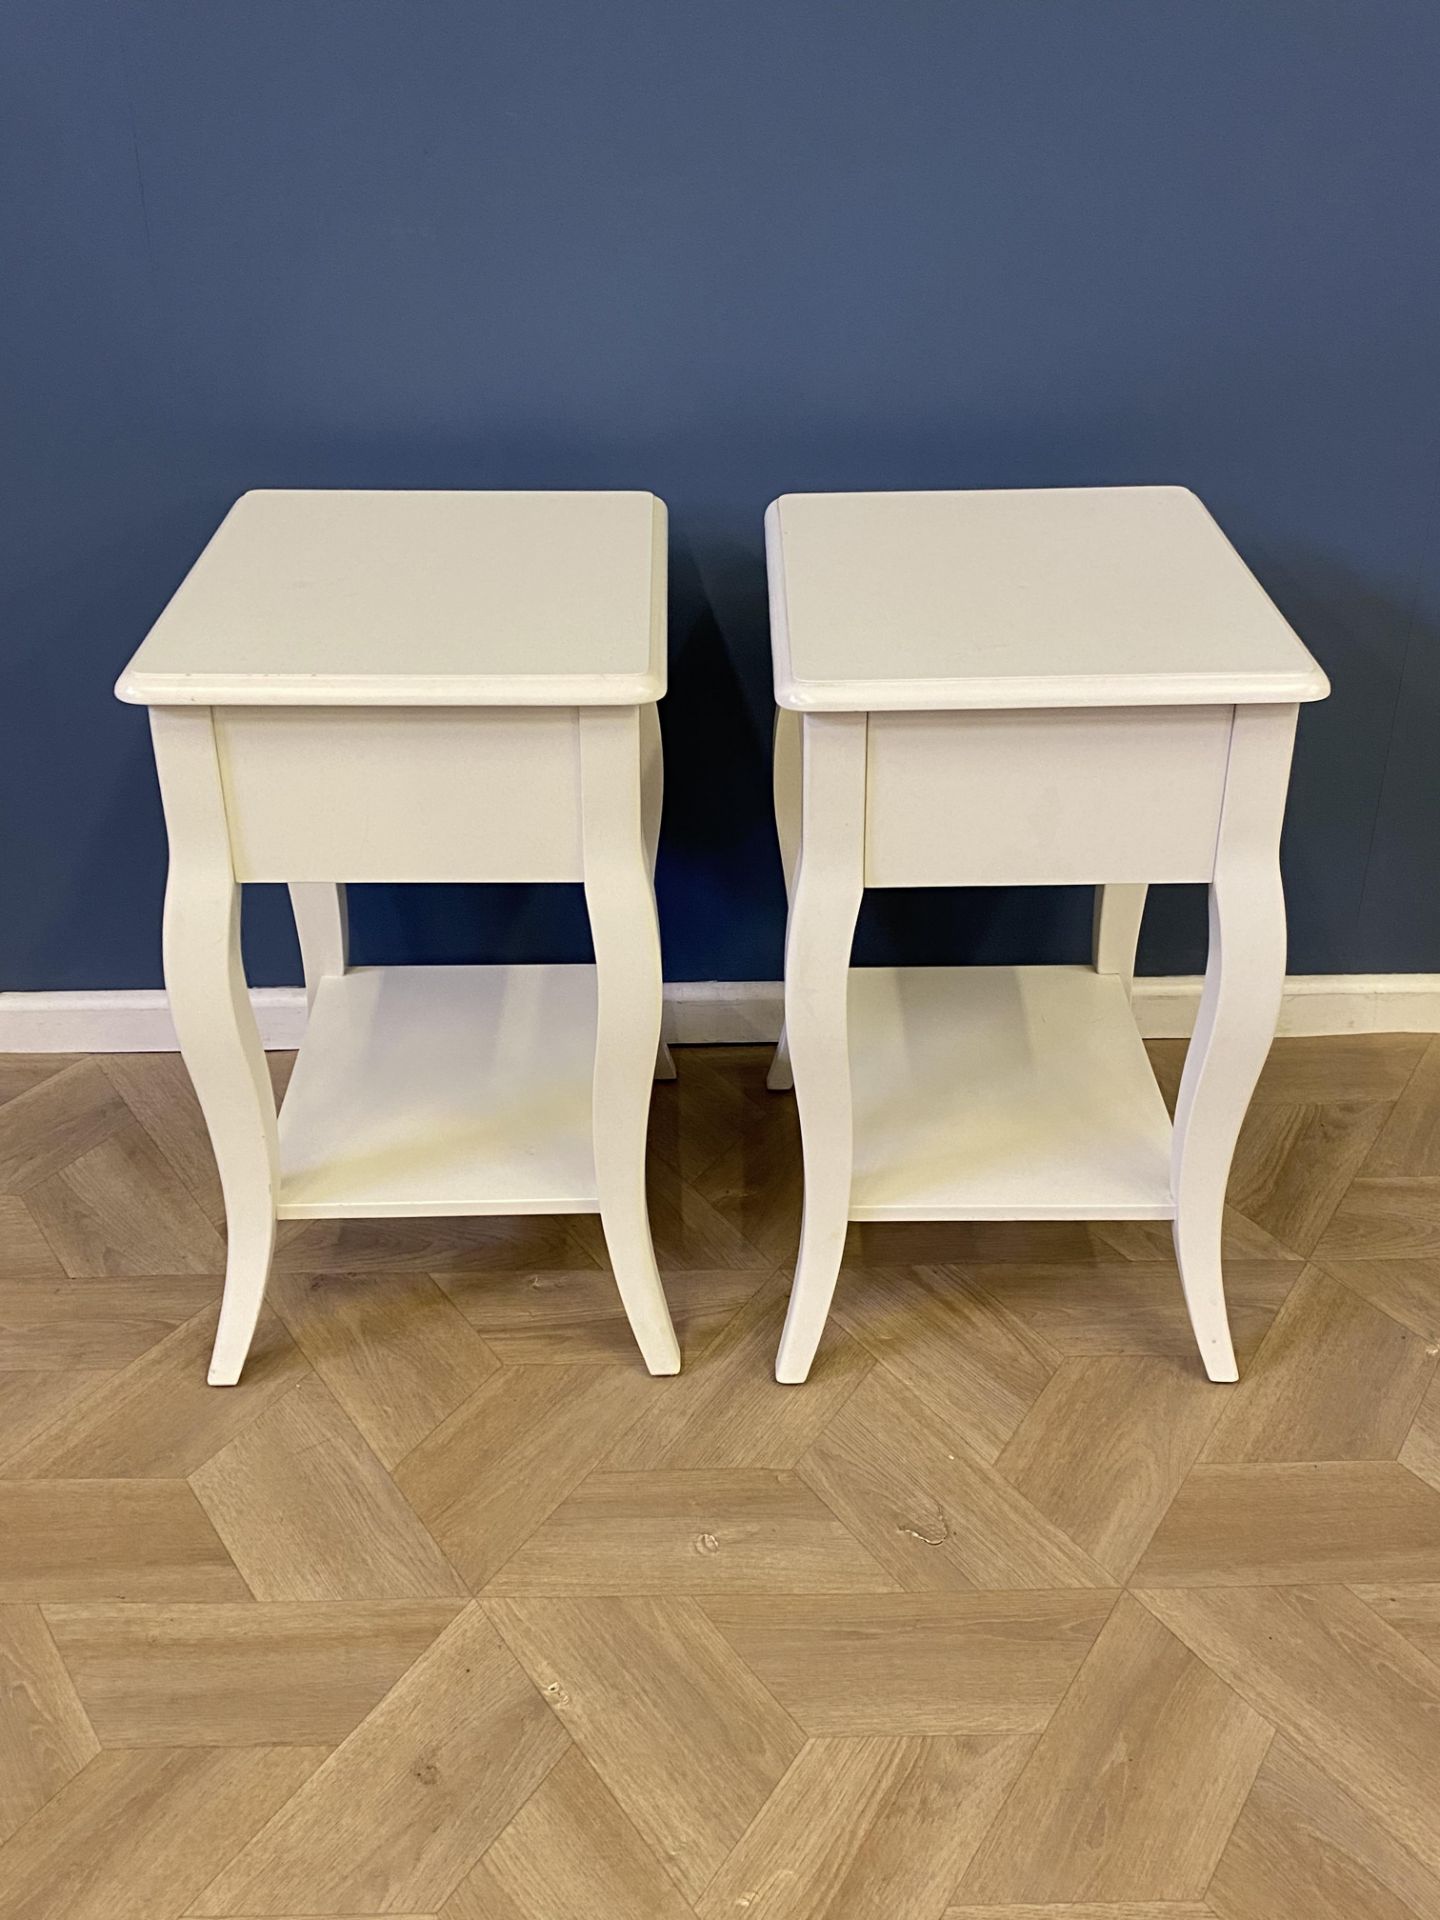 Pair of contemporary white wood bedside tables - Image 5 of 6